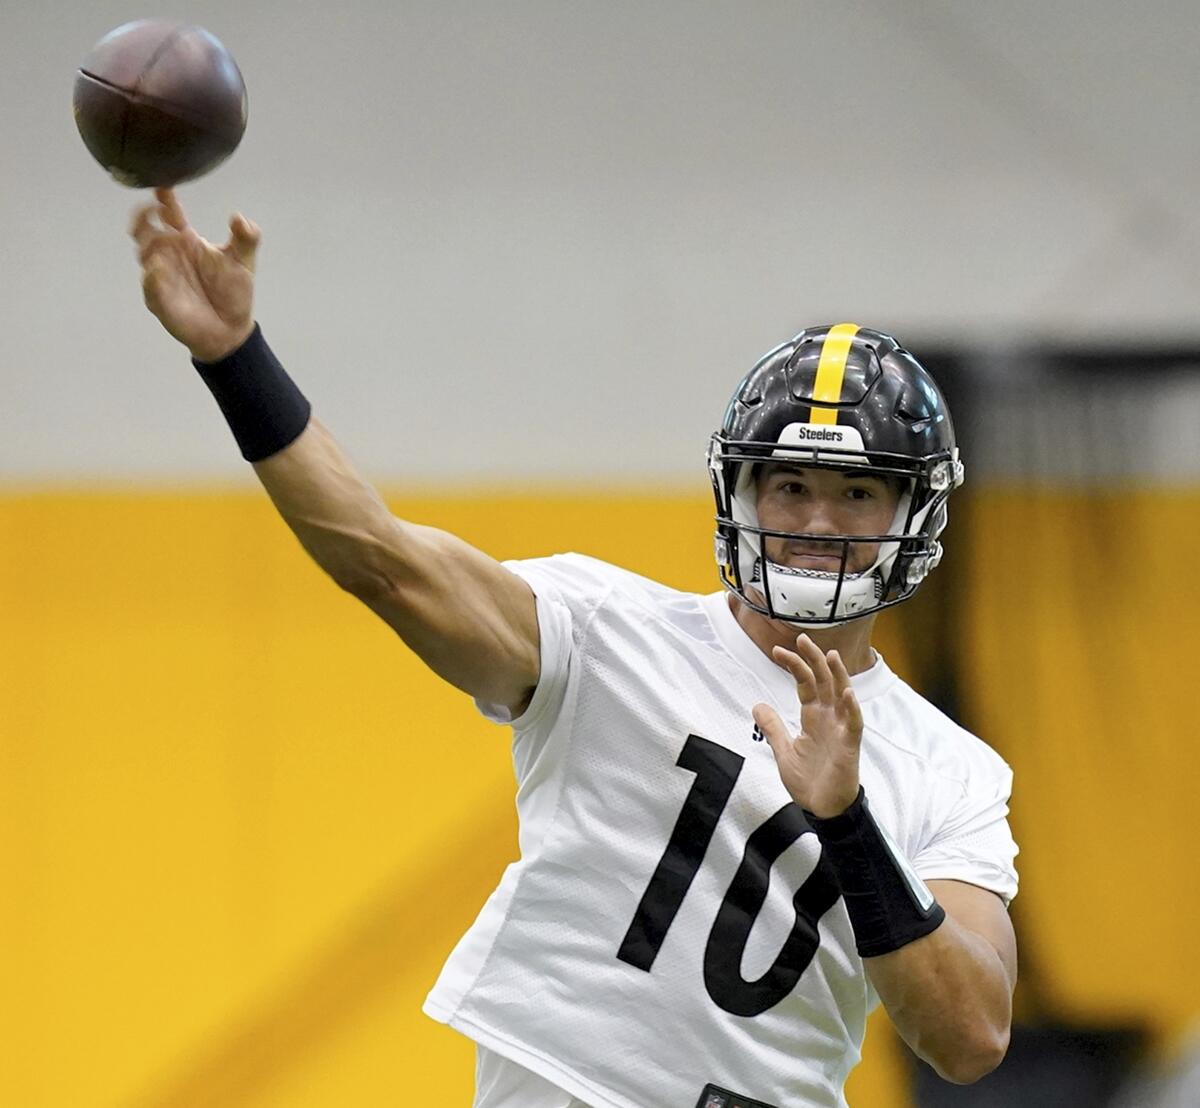 Pittsburgh Steelers quarterback Mitch Trubisky throws during NFL football practice Tuesday, Aug. 30, 2022, in Pittsburgh. (Matt Freed/Pittsburgh Post-Gazette via AP)